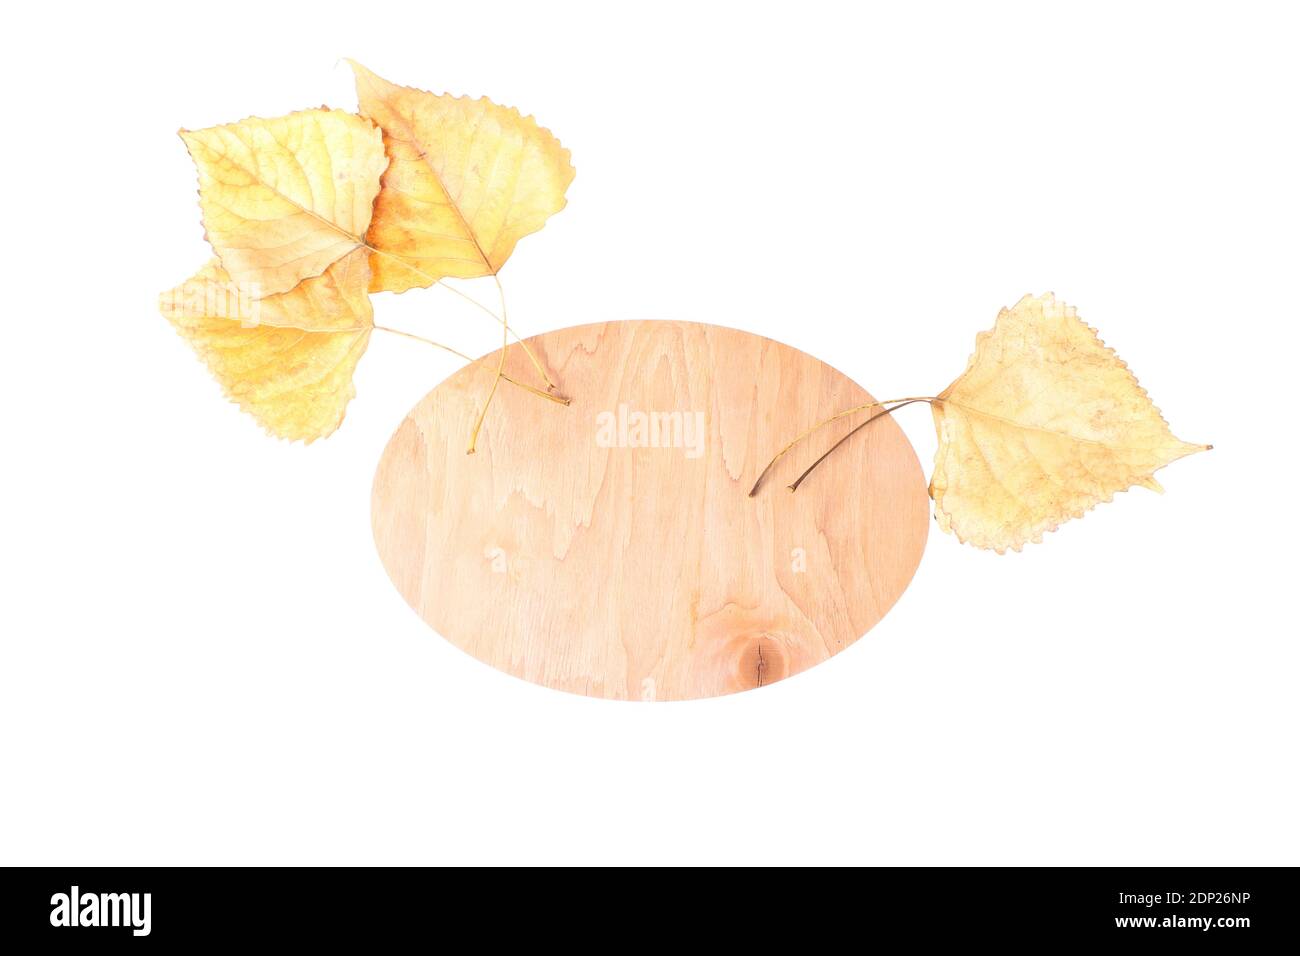 Wooden board and fallen autumn leaves isolated on white background Stock Photo